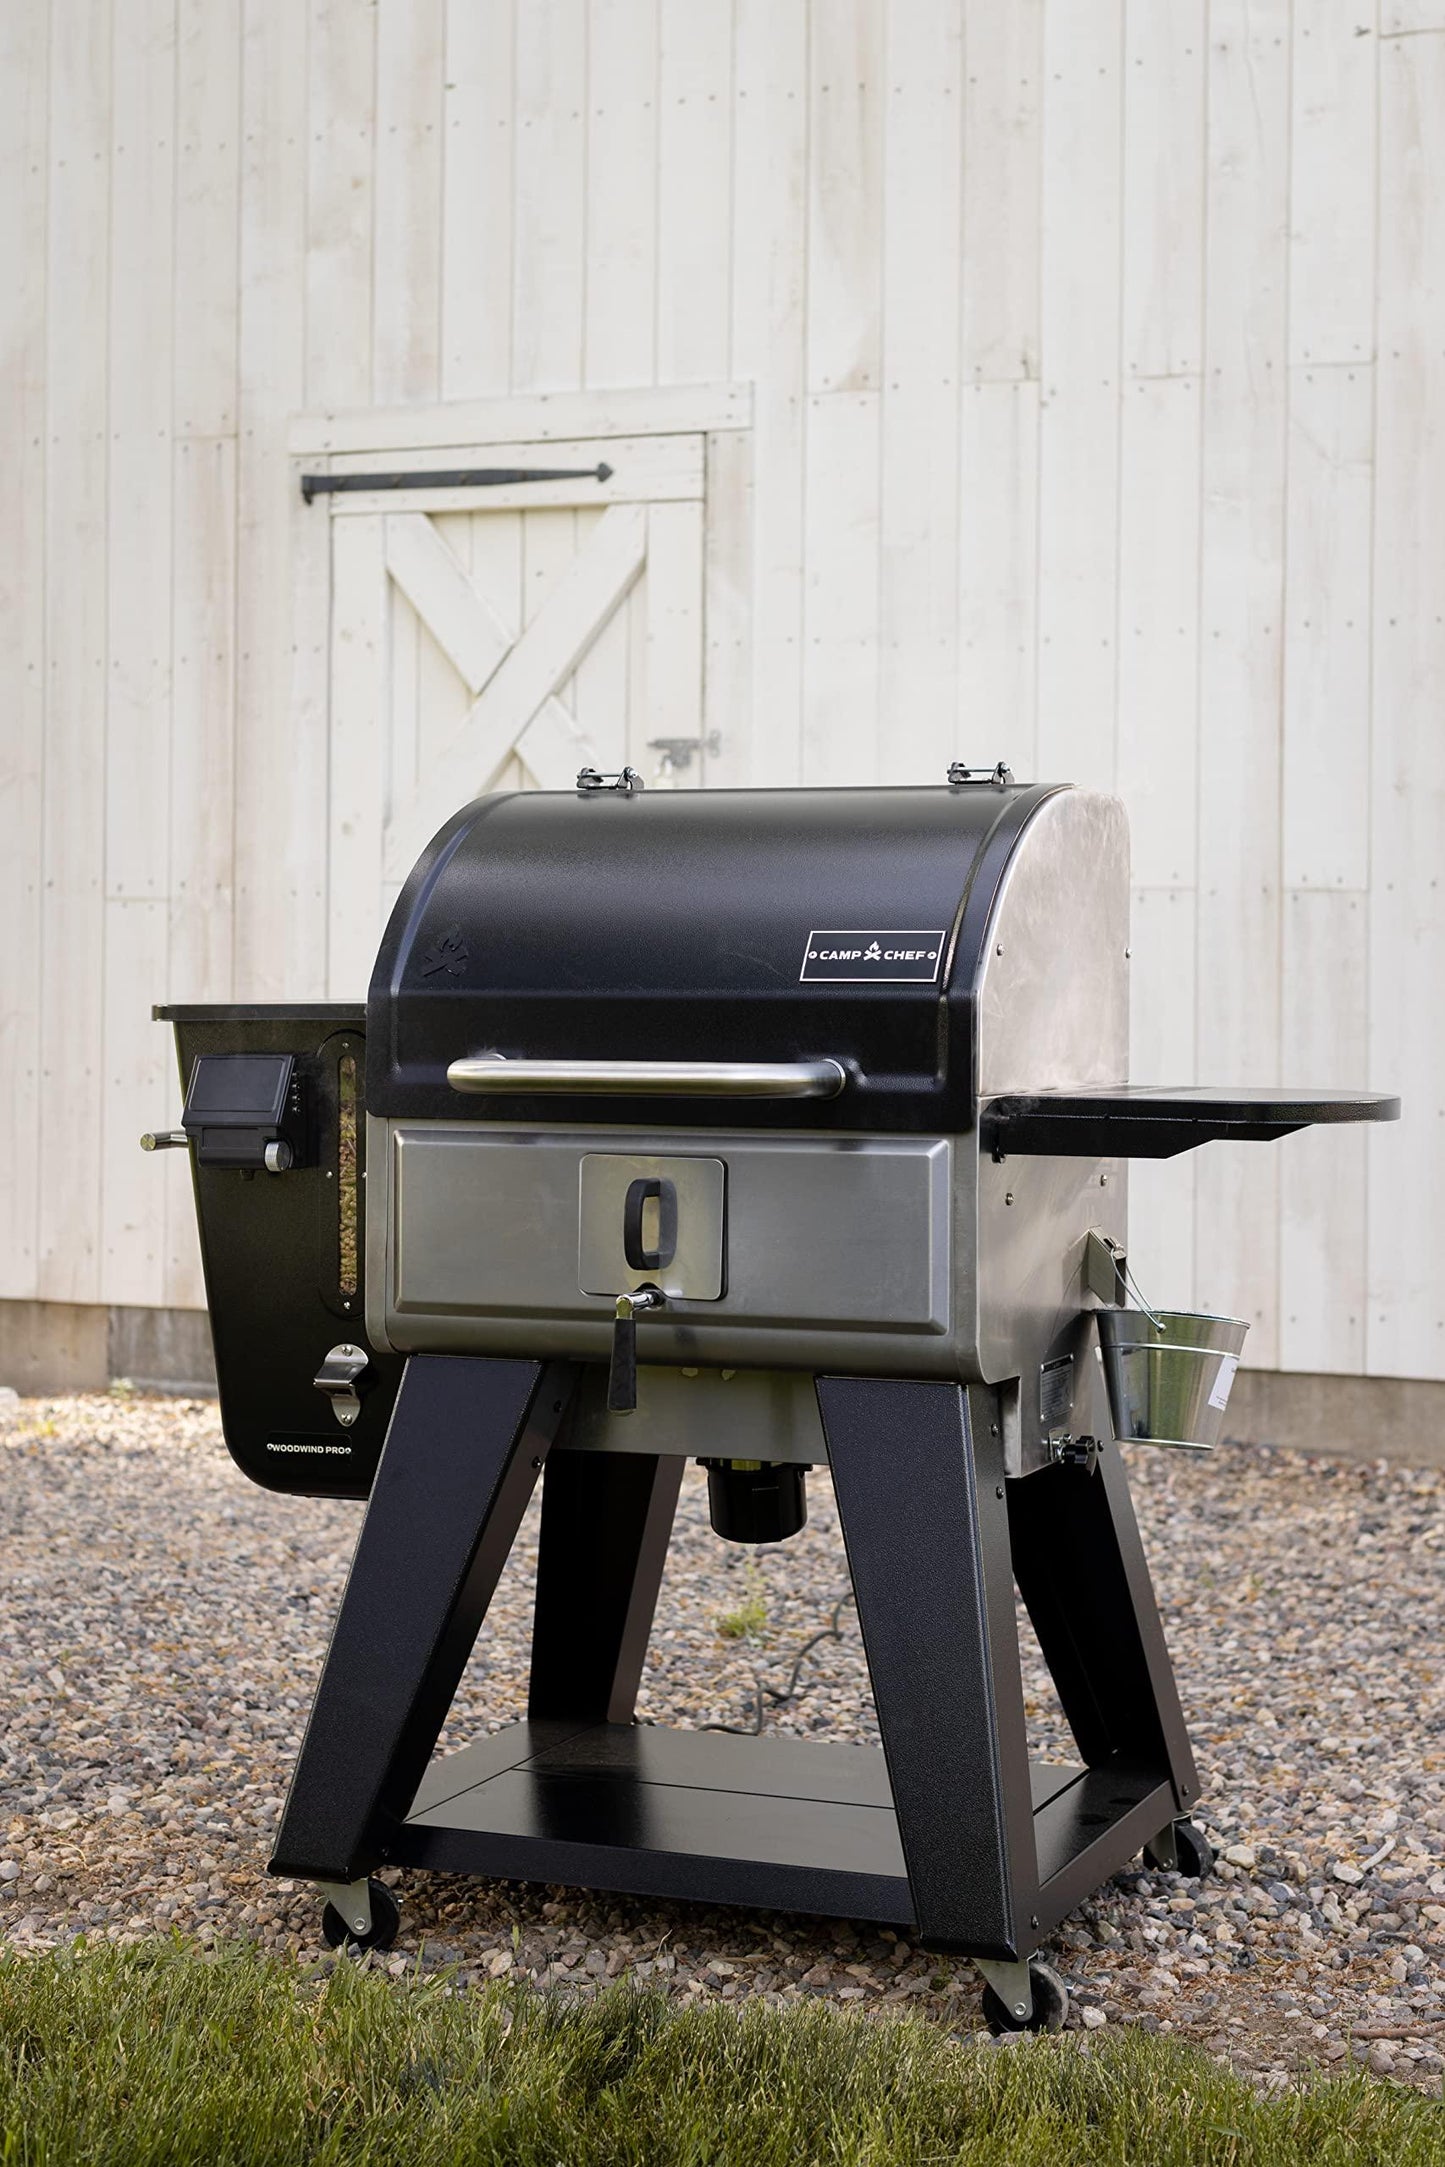 Camp Chef Woodwind Pro 24 Grill - Pellet Grill & Smoker for Outdoor Cooking - Comes with WIFI Connectivity - Sidekick Compatible - 811 Sq In Total Rack Surface Area - CookCave